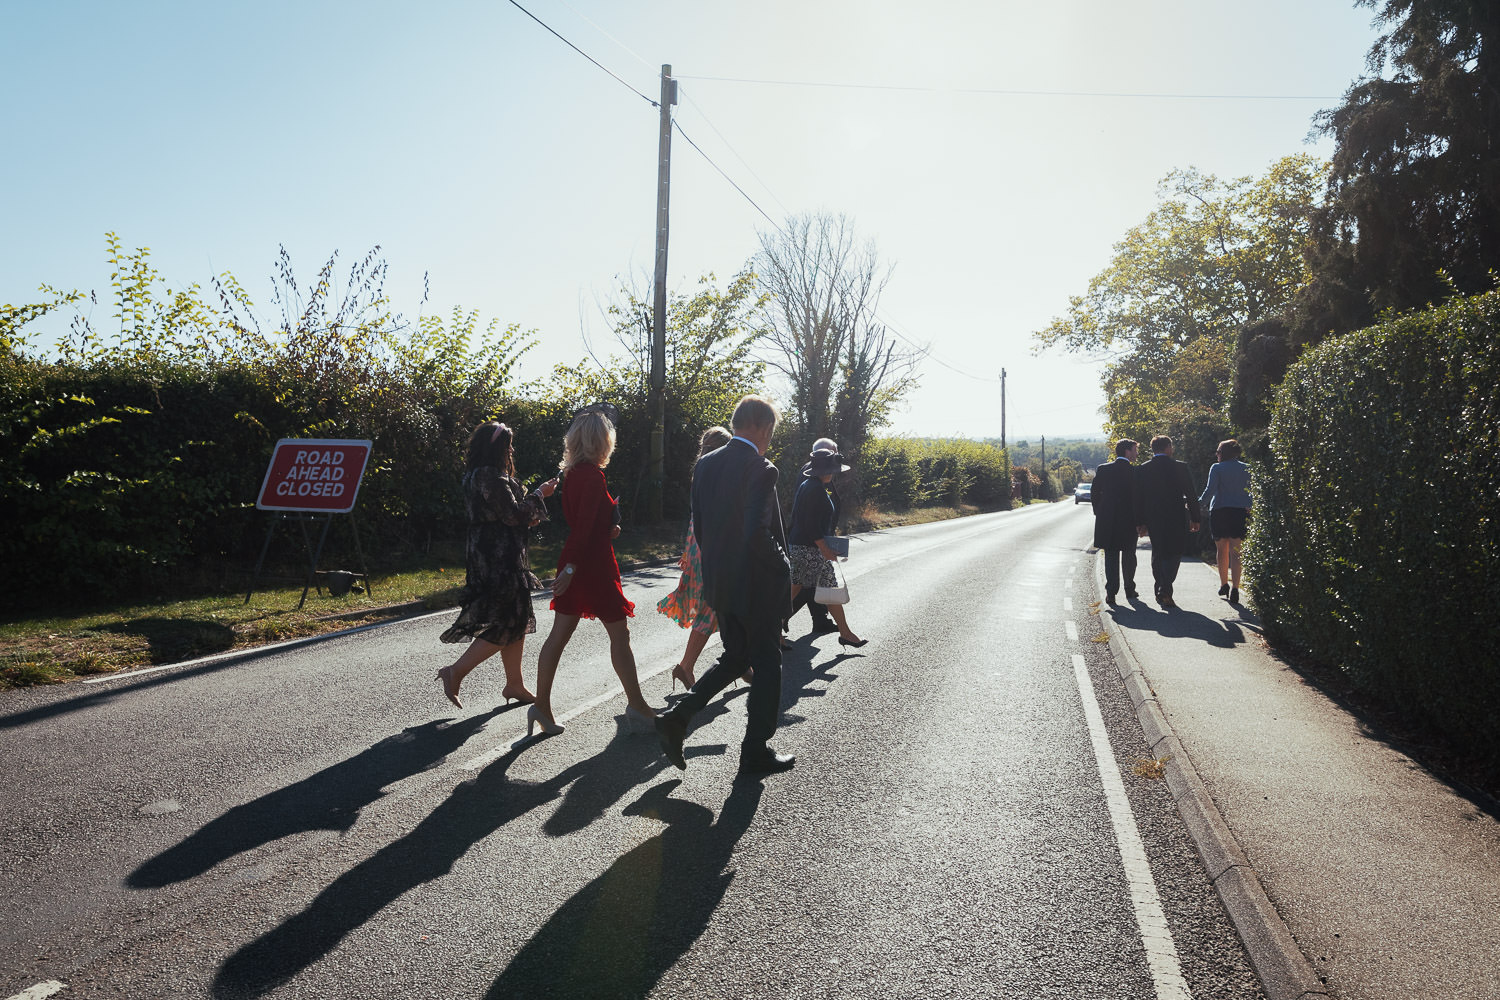 People leaving the church after a wedding walk across Woodham Road in Stow Maries. It's a sunny day and they cast shadows on the road.